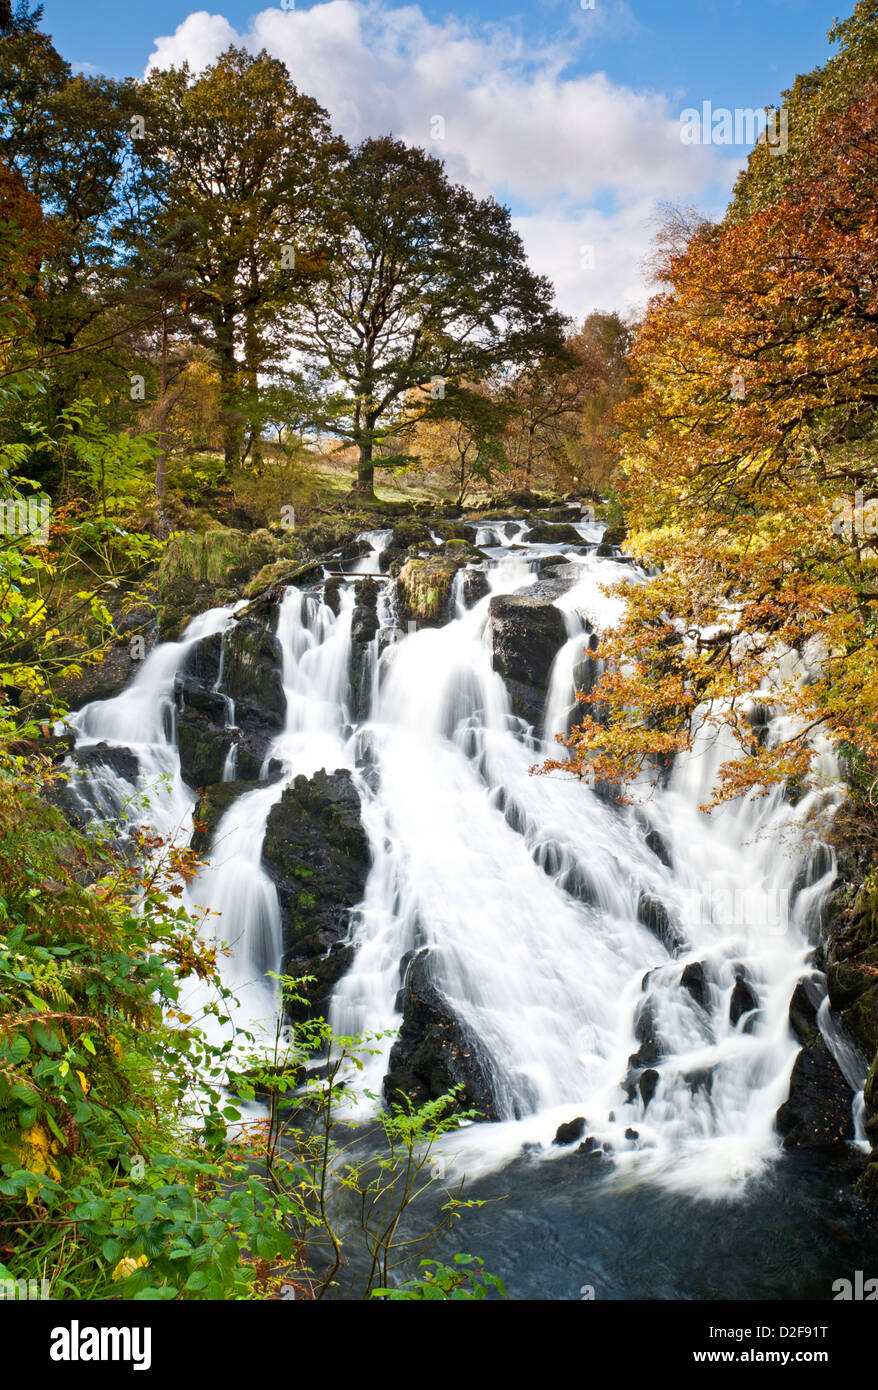 Swallow Falls in Autumn, Near Betws y Coed, Snowdonia National Park, Wales, UK Stock Photo